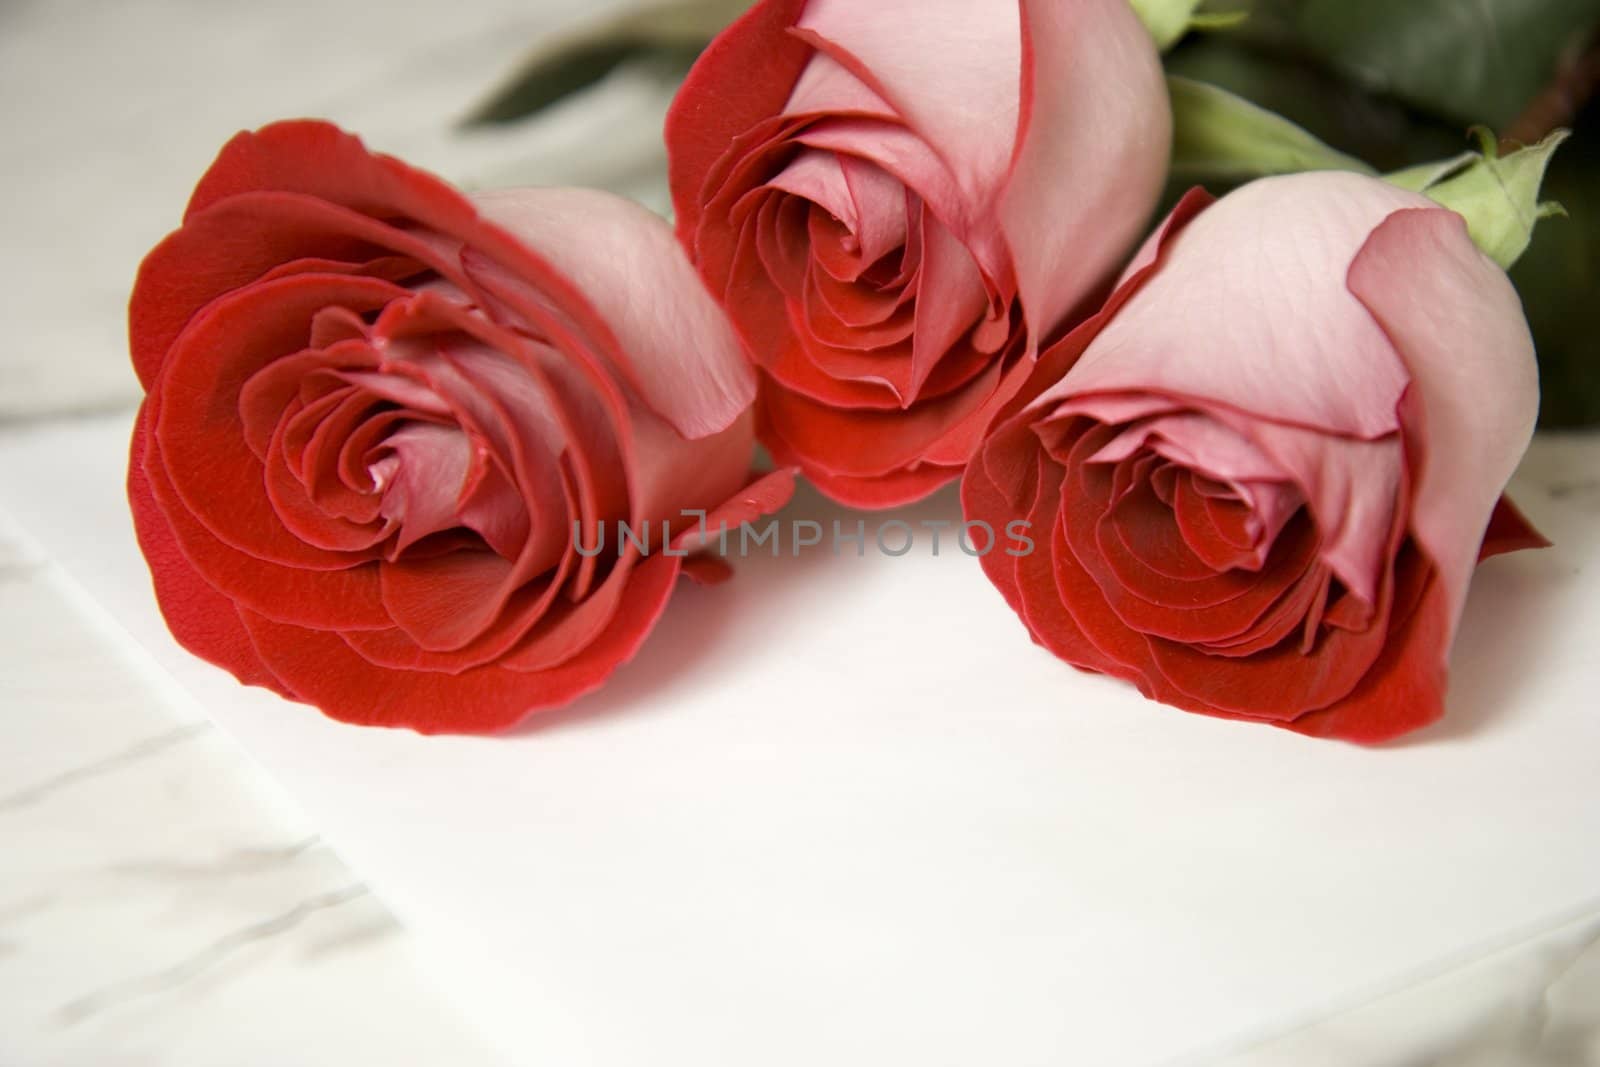 Three red roses and note on a marble table